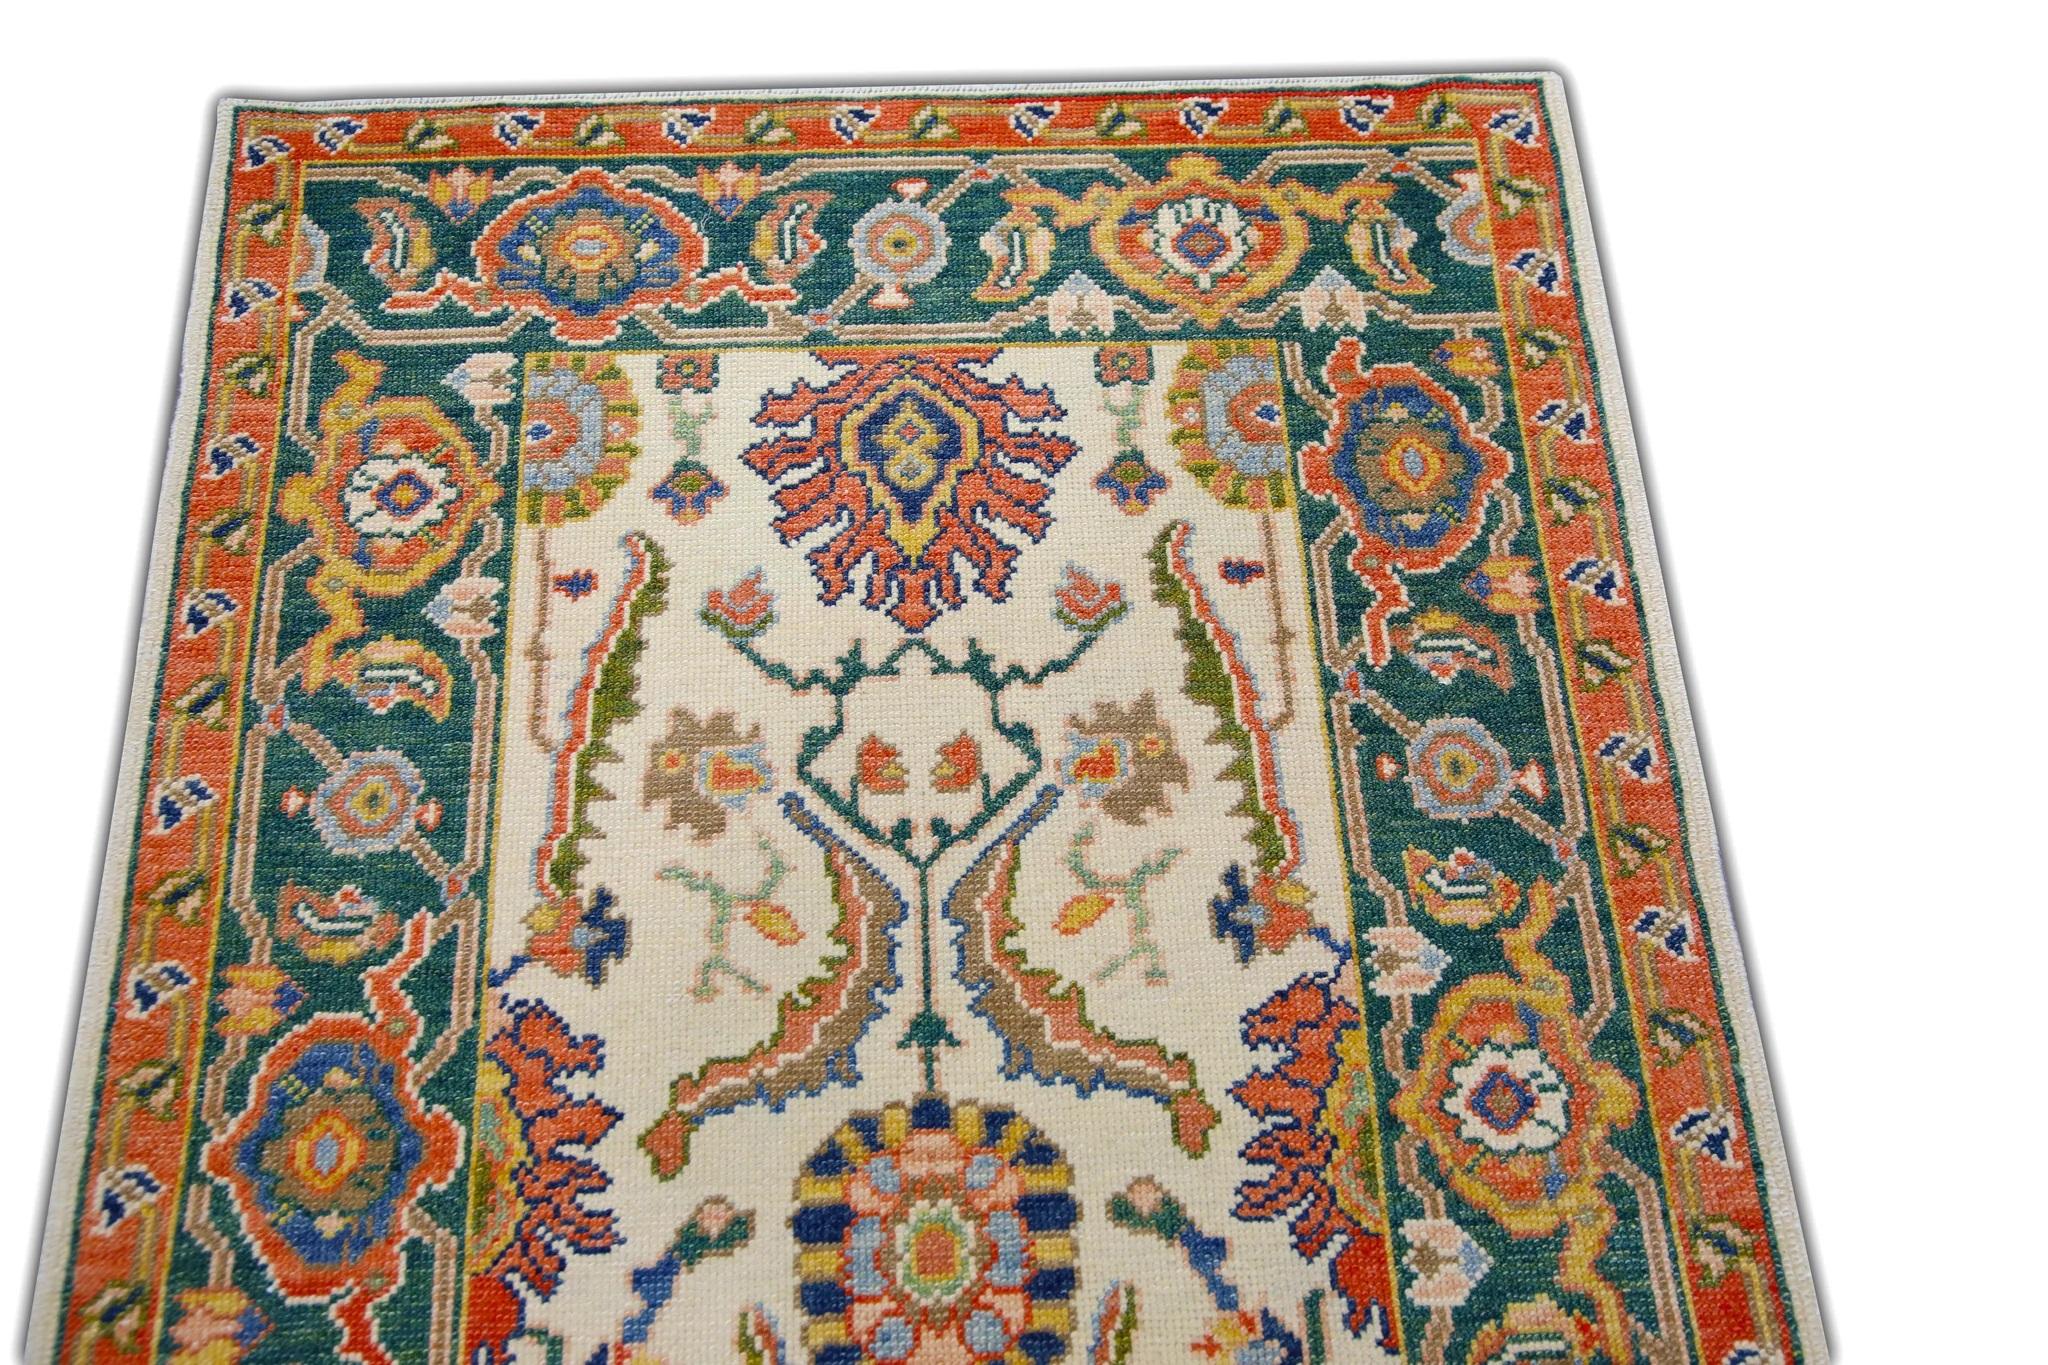 Floral Turkish Finewoven Wool Oushak Rug in Cream, Green, and Red 2'9